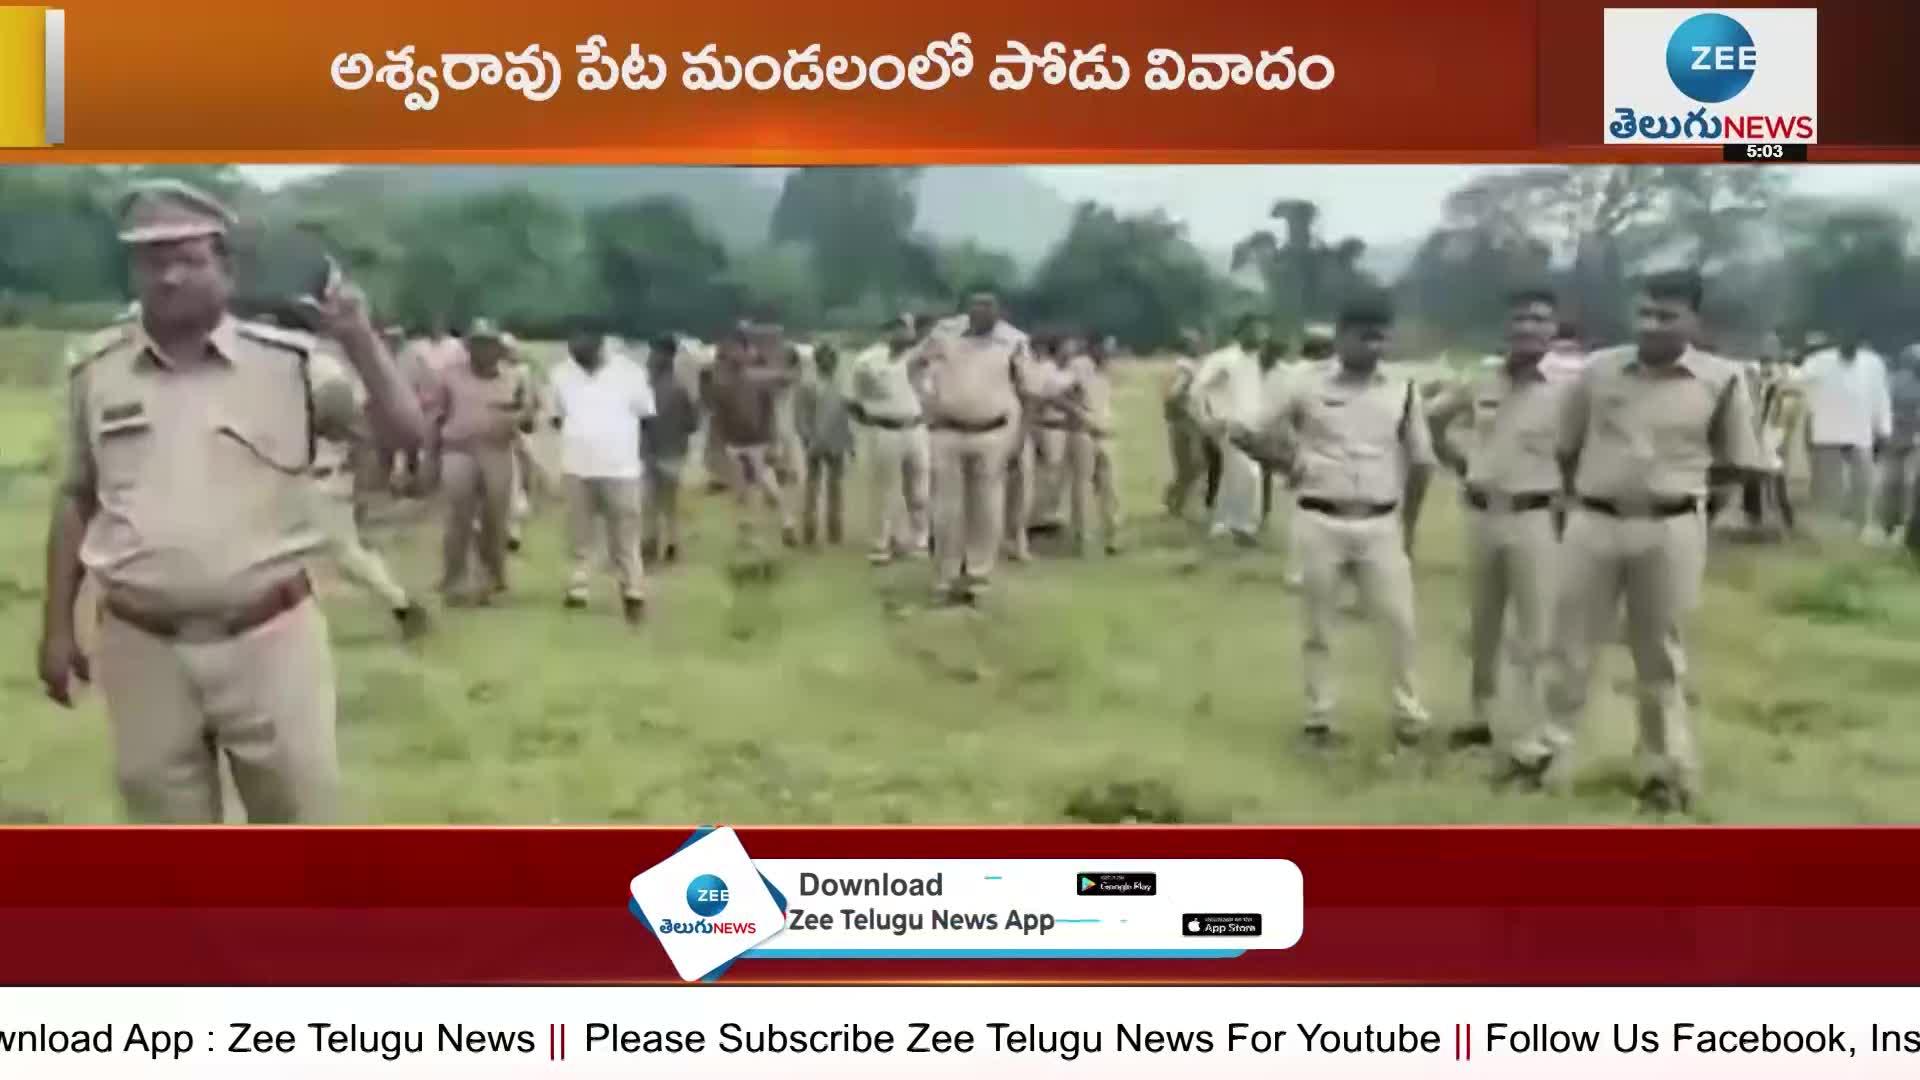 Podubhoomi disputes in between tribals and forest officials bhadradri kothagudem district